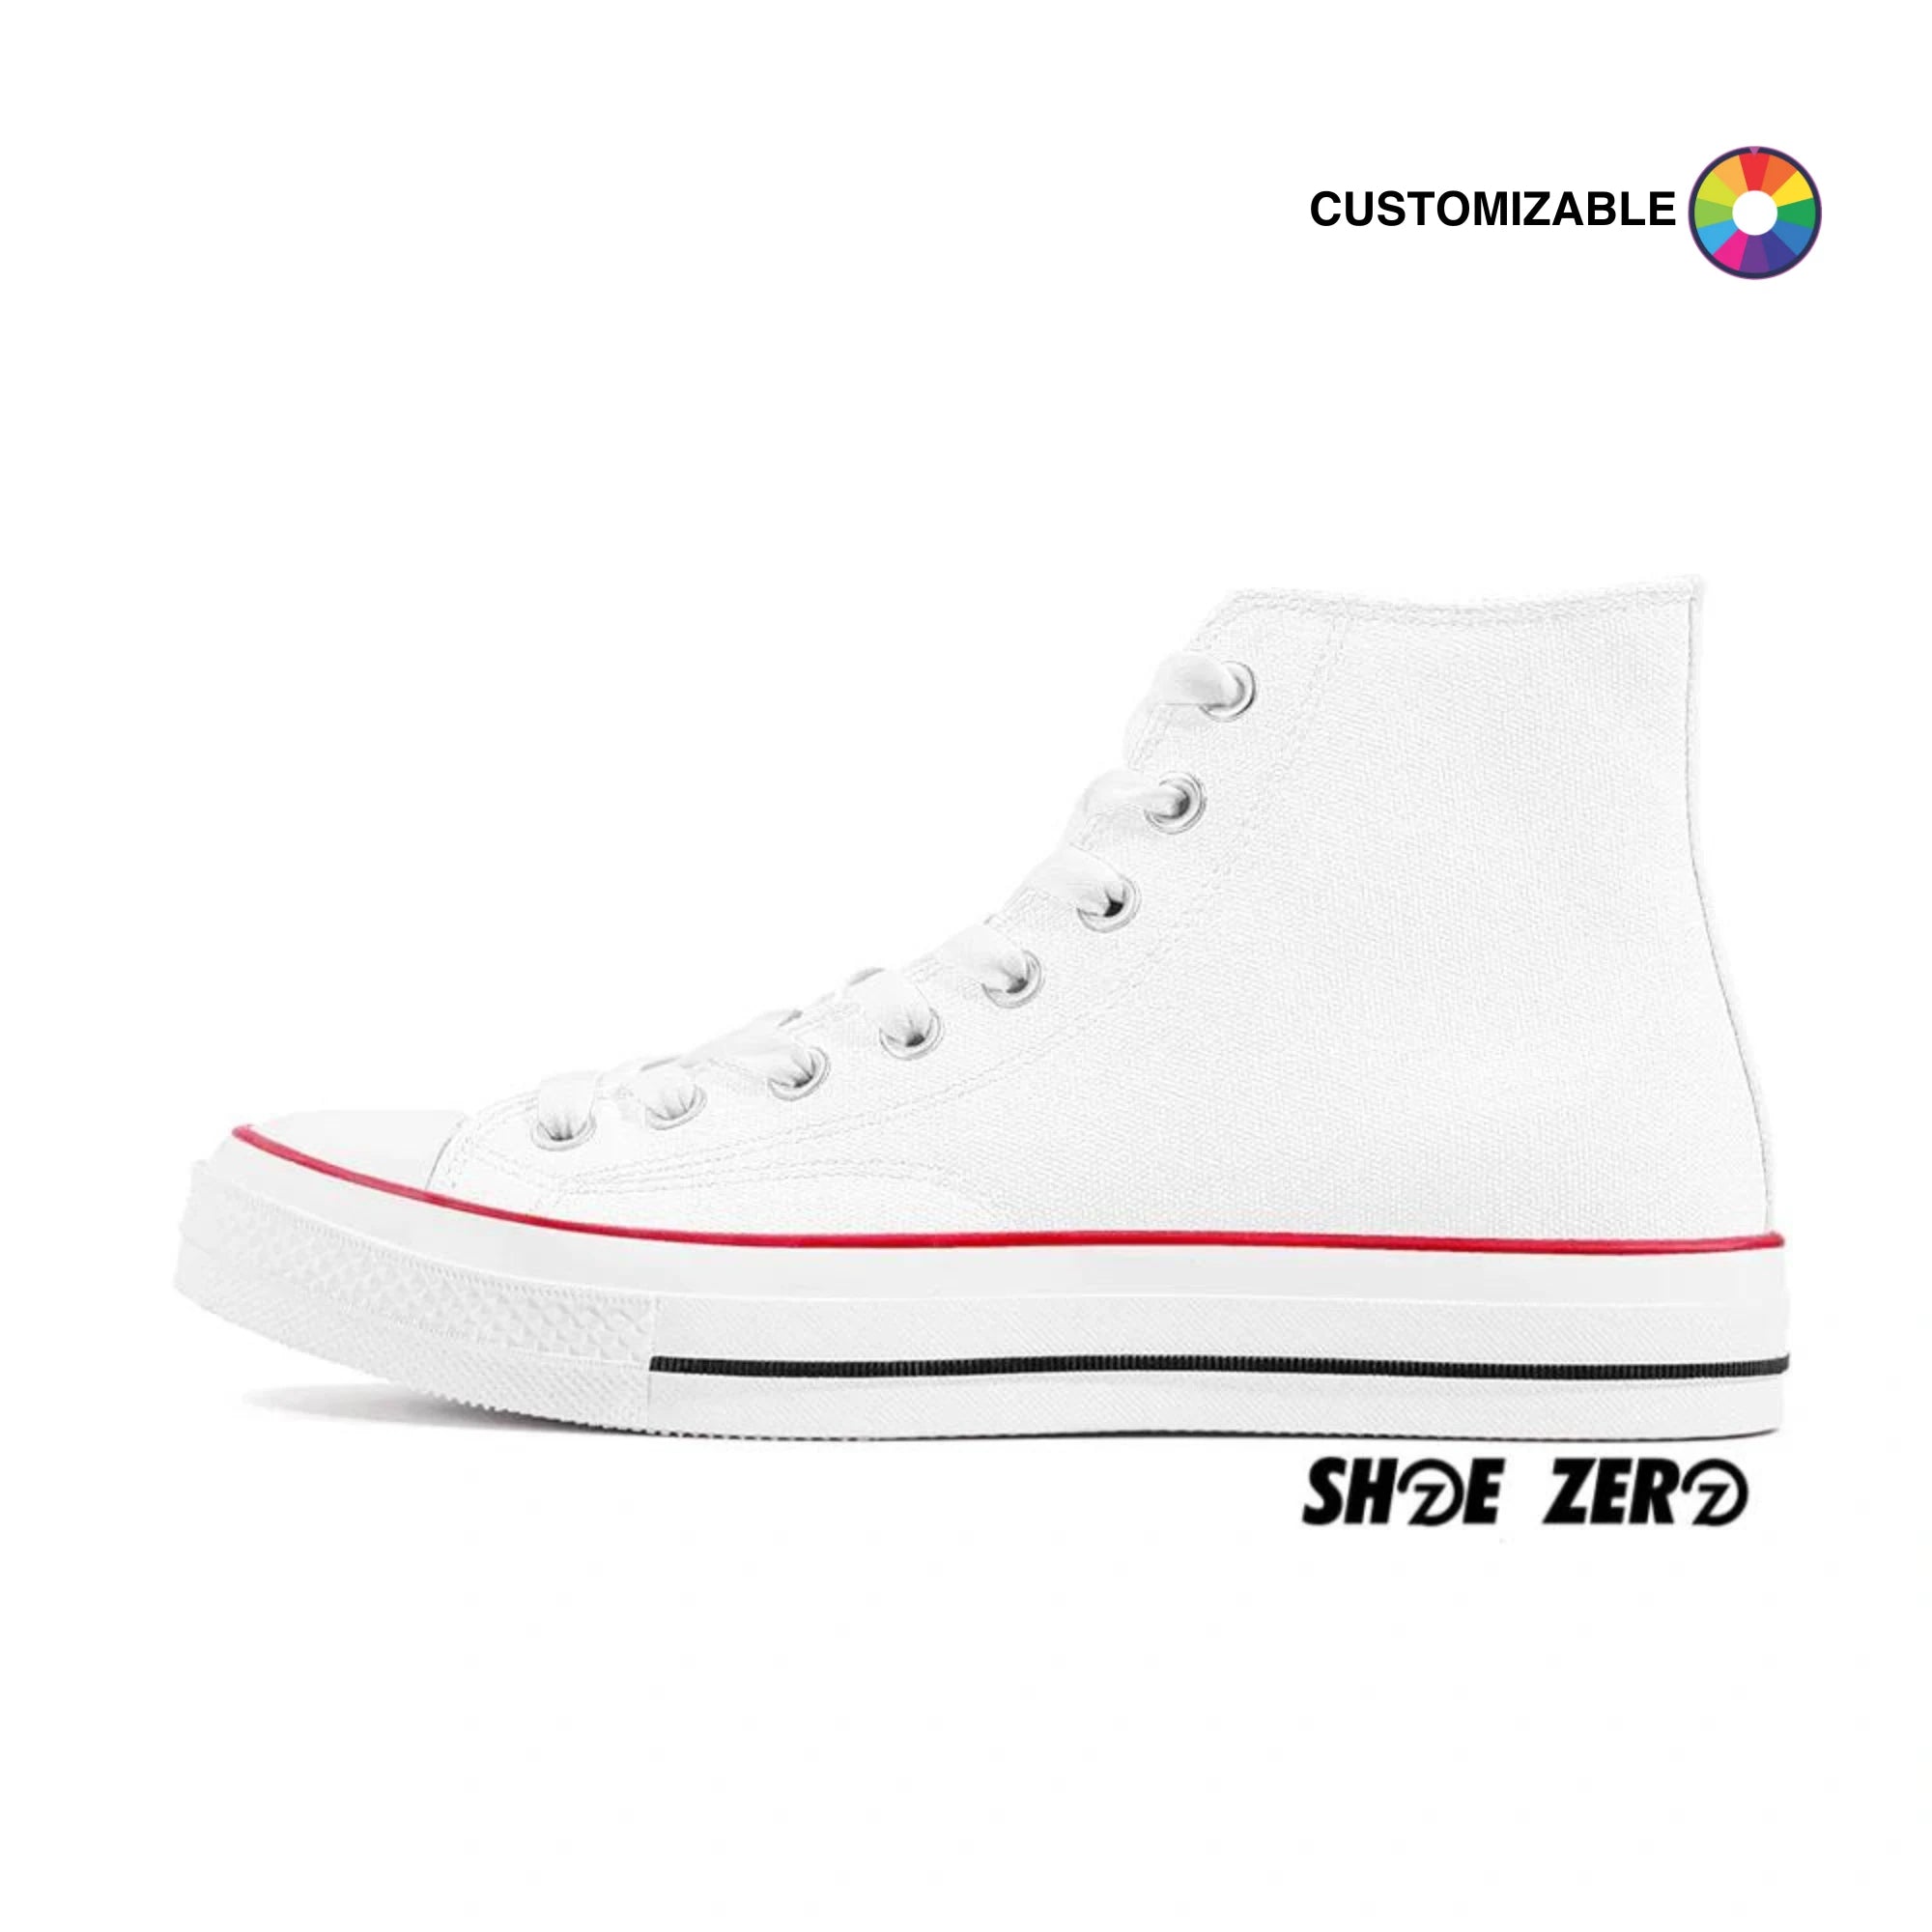 Customizable Classic Canvas Shoes (White Sole) High Top